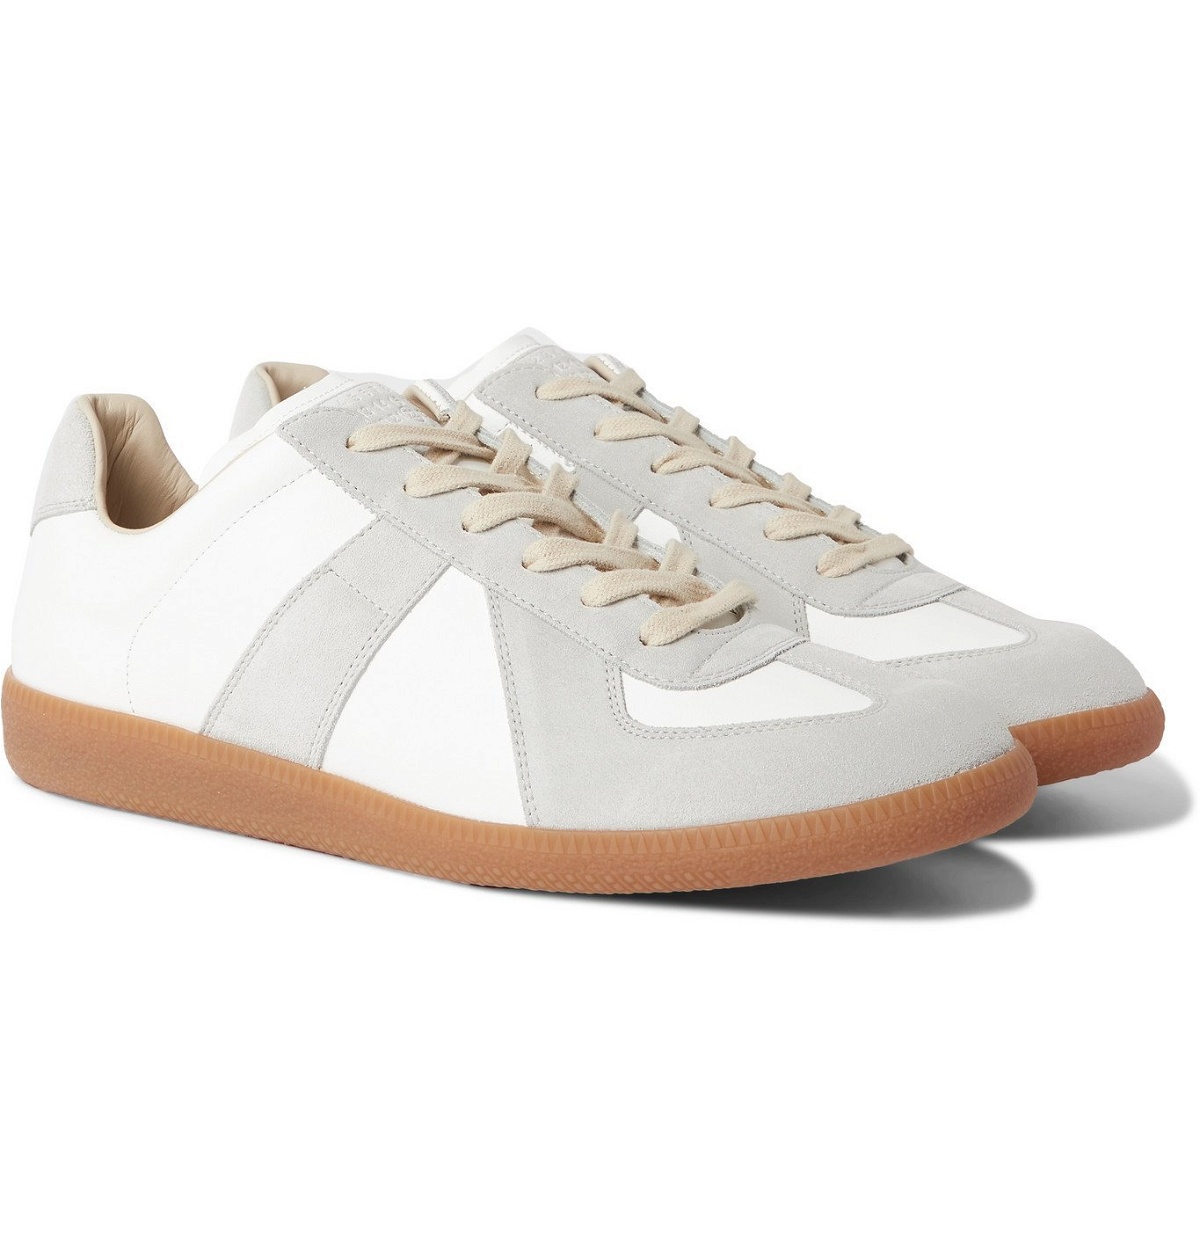 MAISON MARGIELA - Replica Leather and Suede Sneakers - White Maison ...